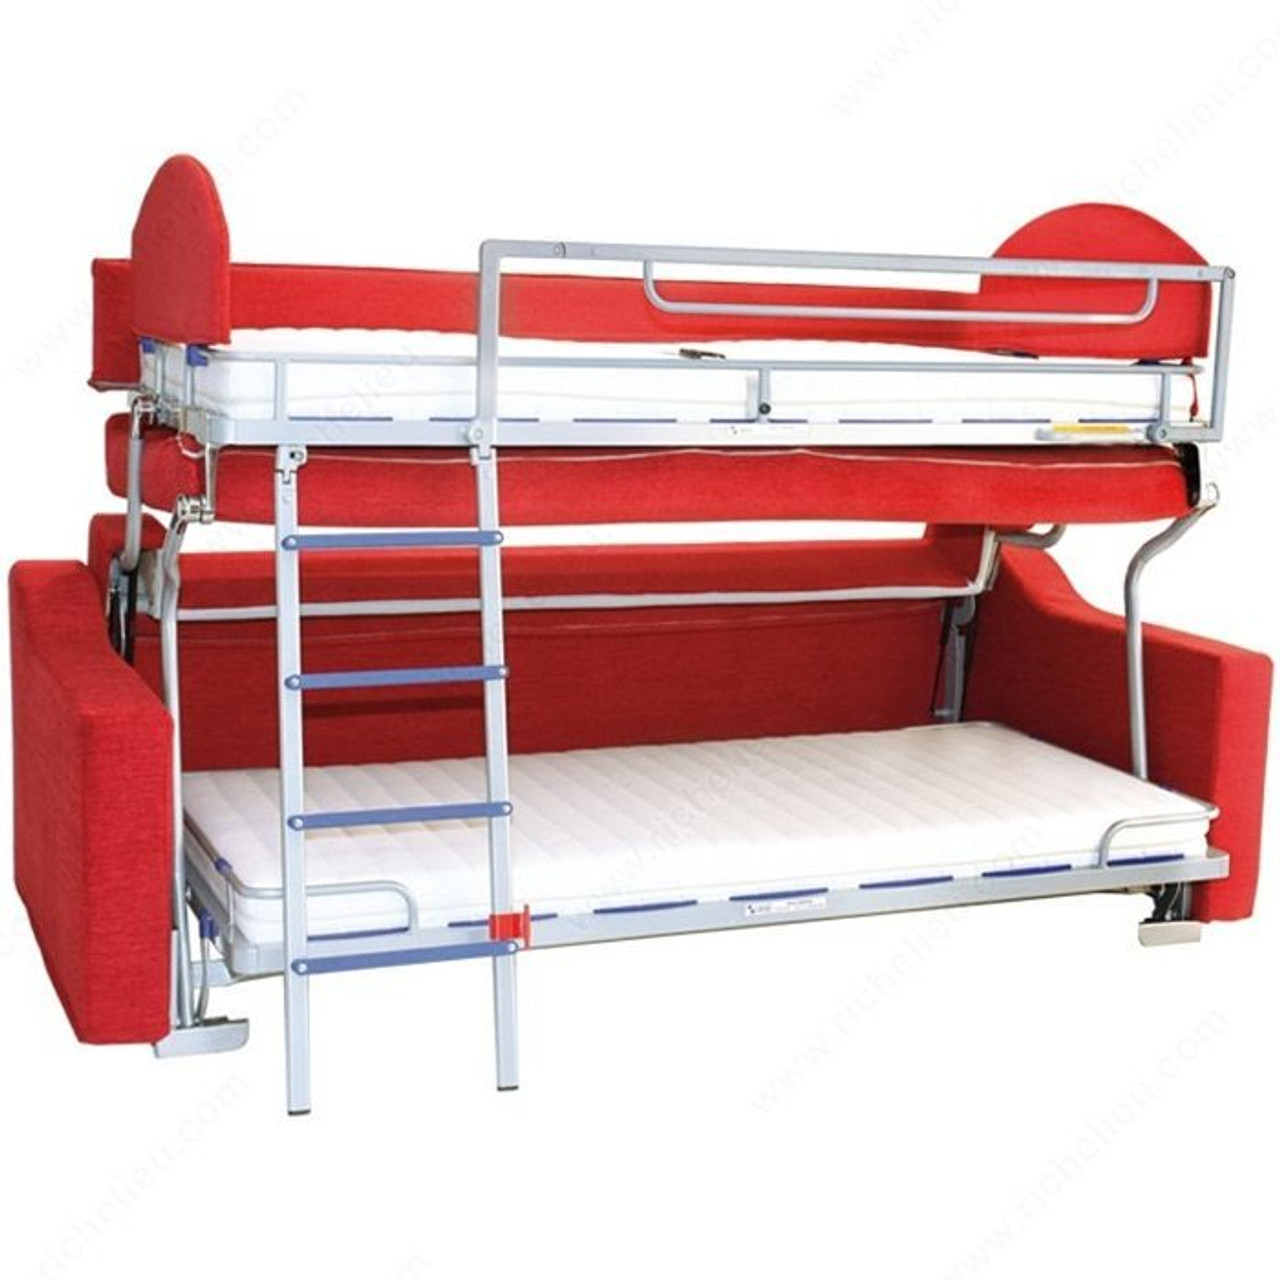 baas kunstmest Registratie Collapsible Foldable Bunk Bed Bank Bed video Frame Only -No upholstery  7'x3'x27" - HANDYCT